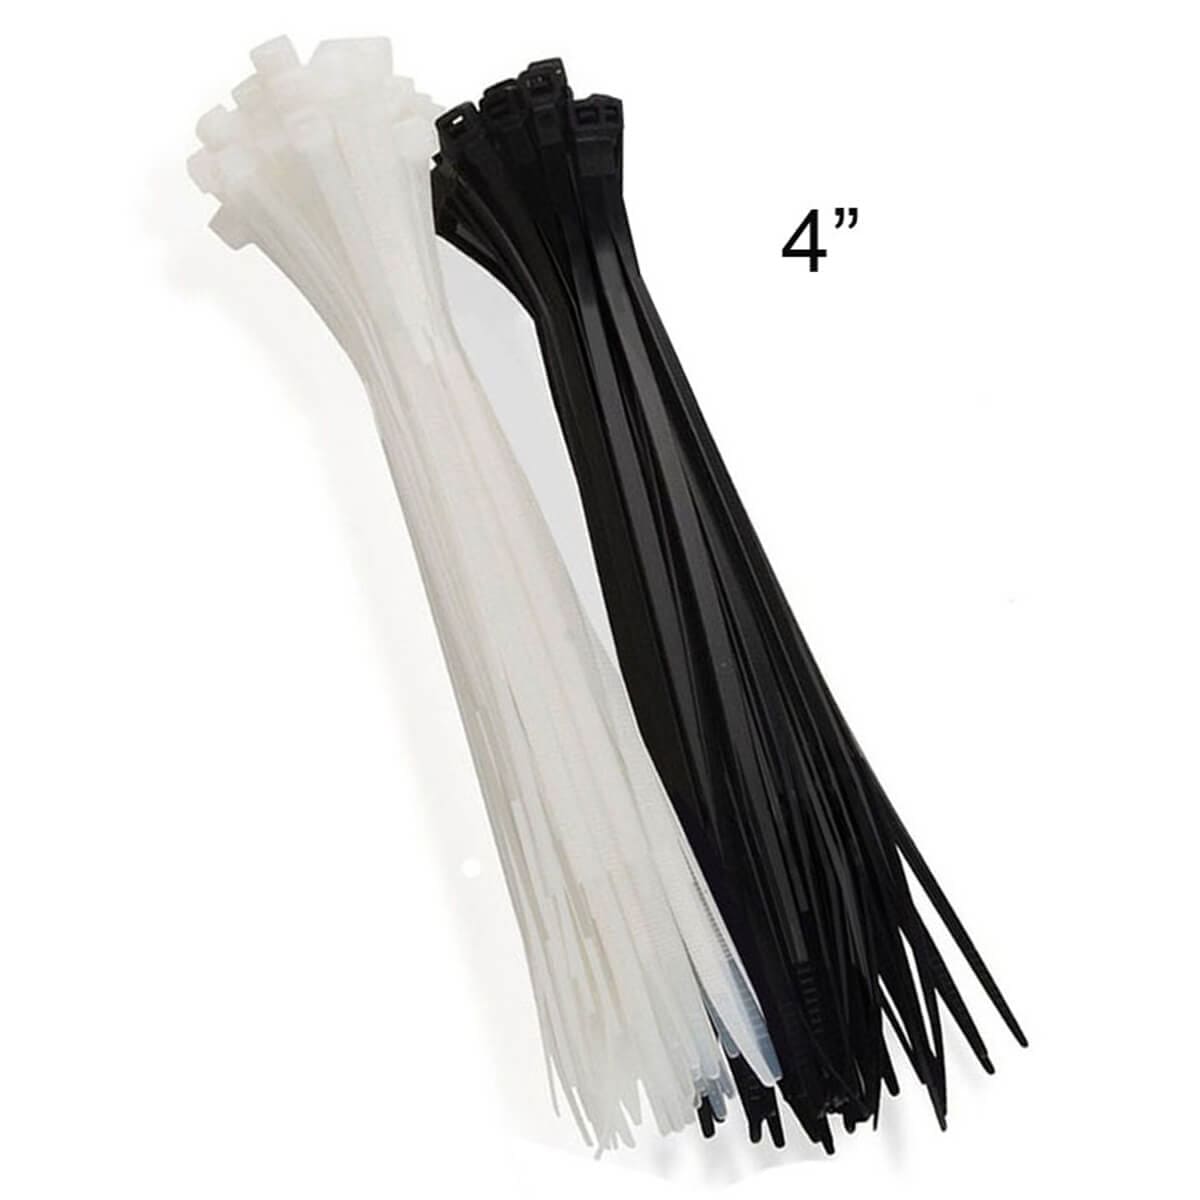 Bundles of 4 inch long black and white cable ties